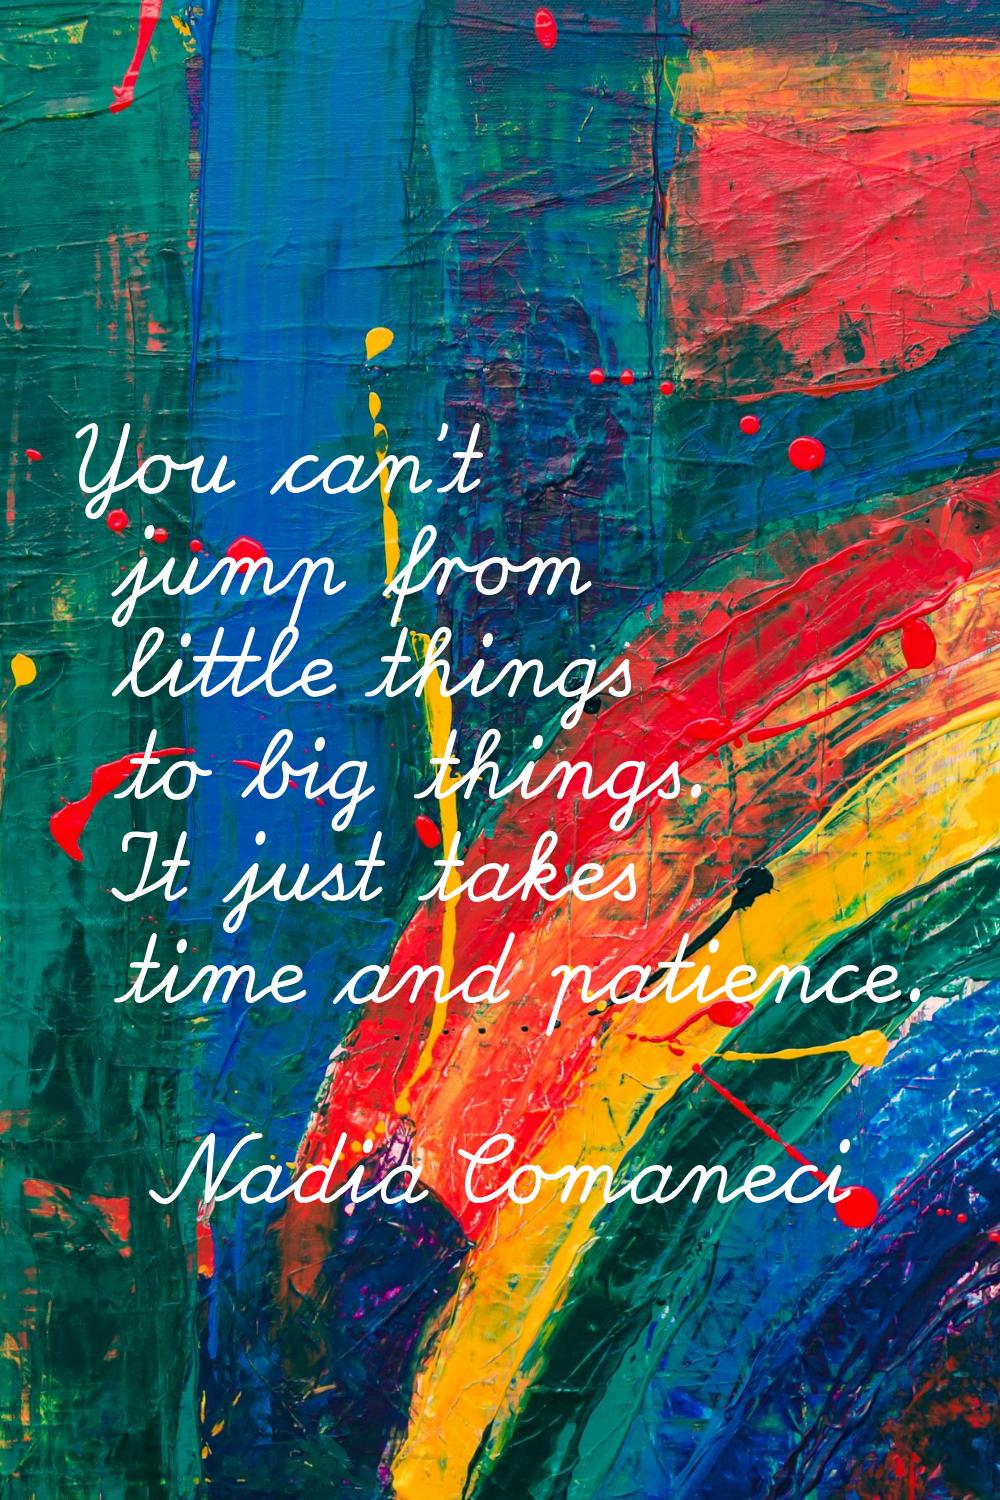 You can't jump from little things to big things. It just takes time and patience.